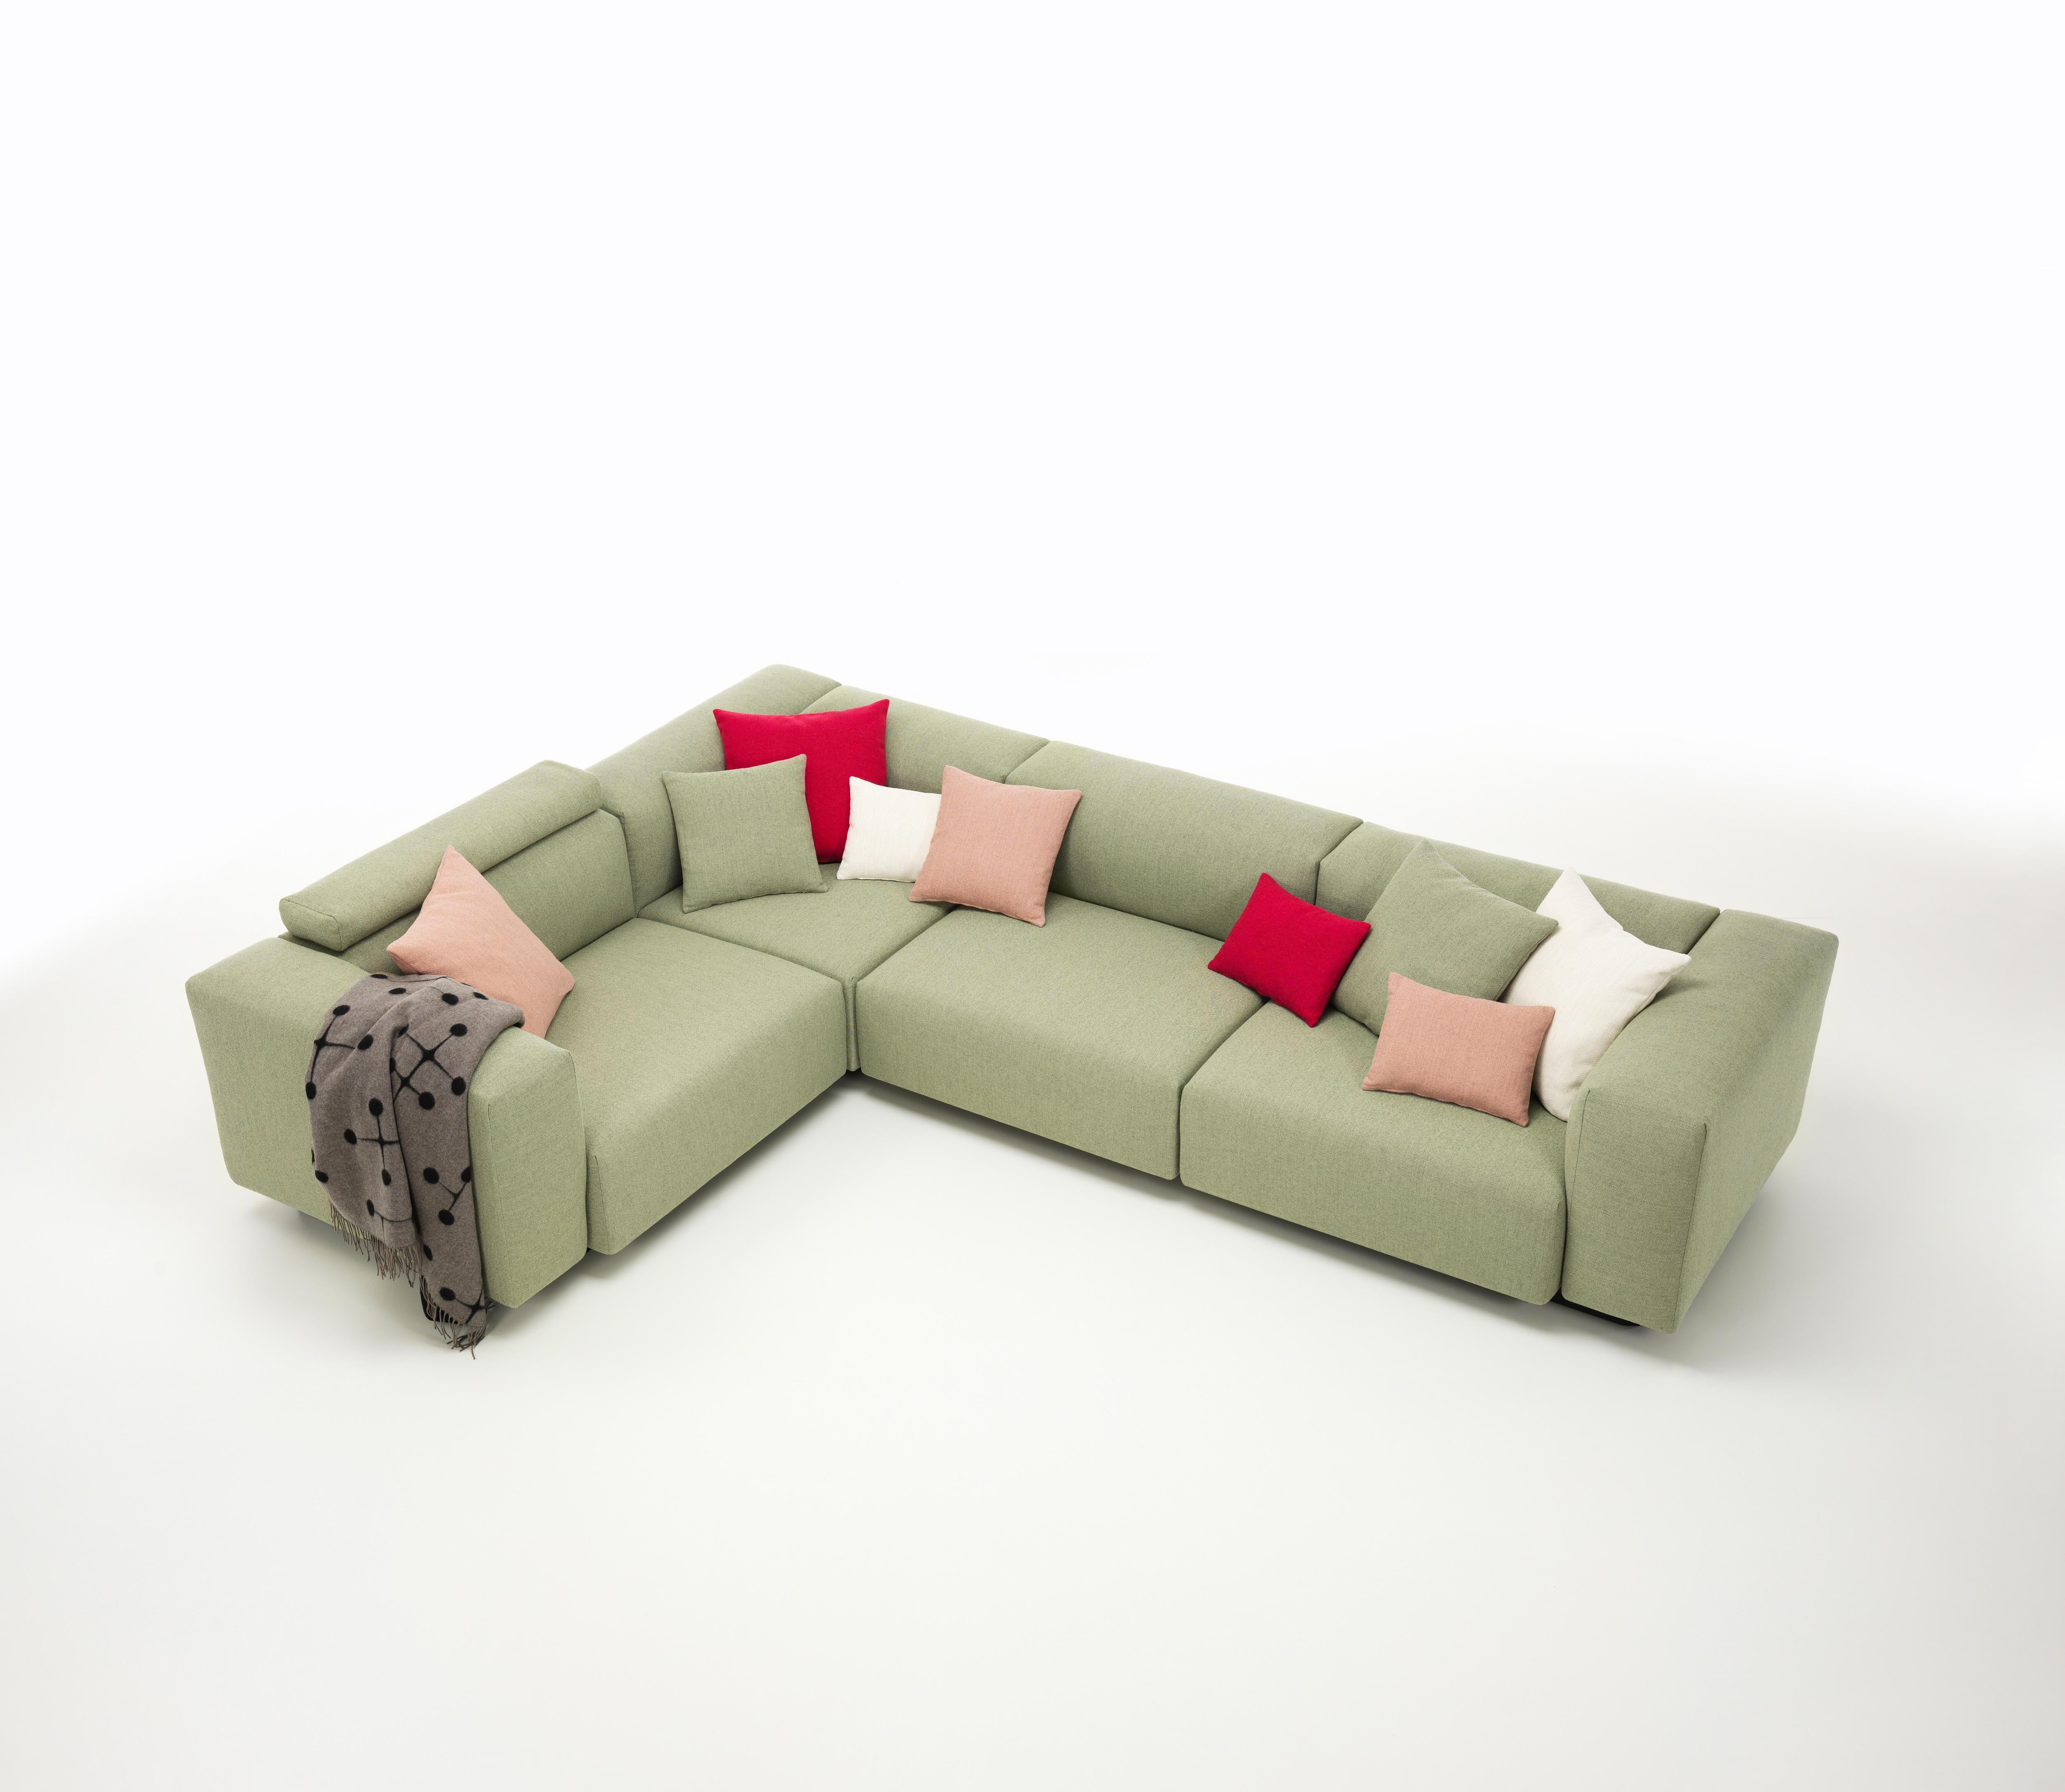 These items are only available in the United States.

The Soft Modular Sofa is Jasper Morrison‘s updated interpretation of what has become a modern Classic: the low-slung modular sofa with a decidedly horizontal emphasis. Uniting carefully